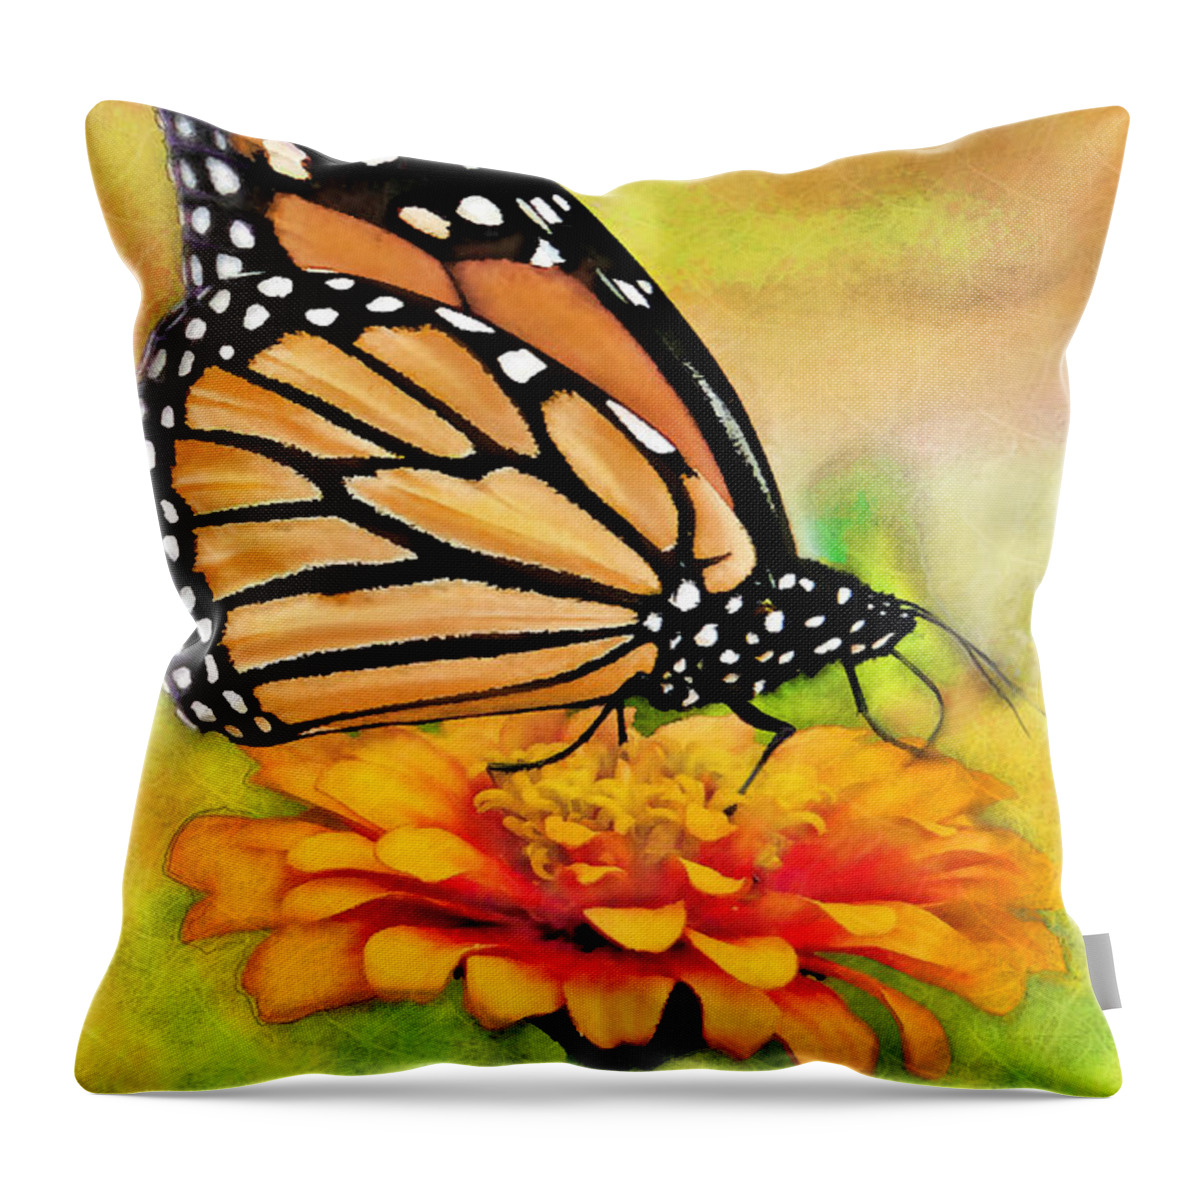 Butterfly Throw Pillow featuring the digital art Monarch Butterfly On Flower by Jeff Breiman